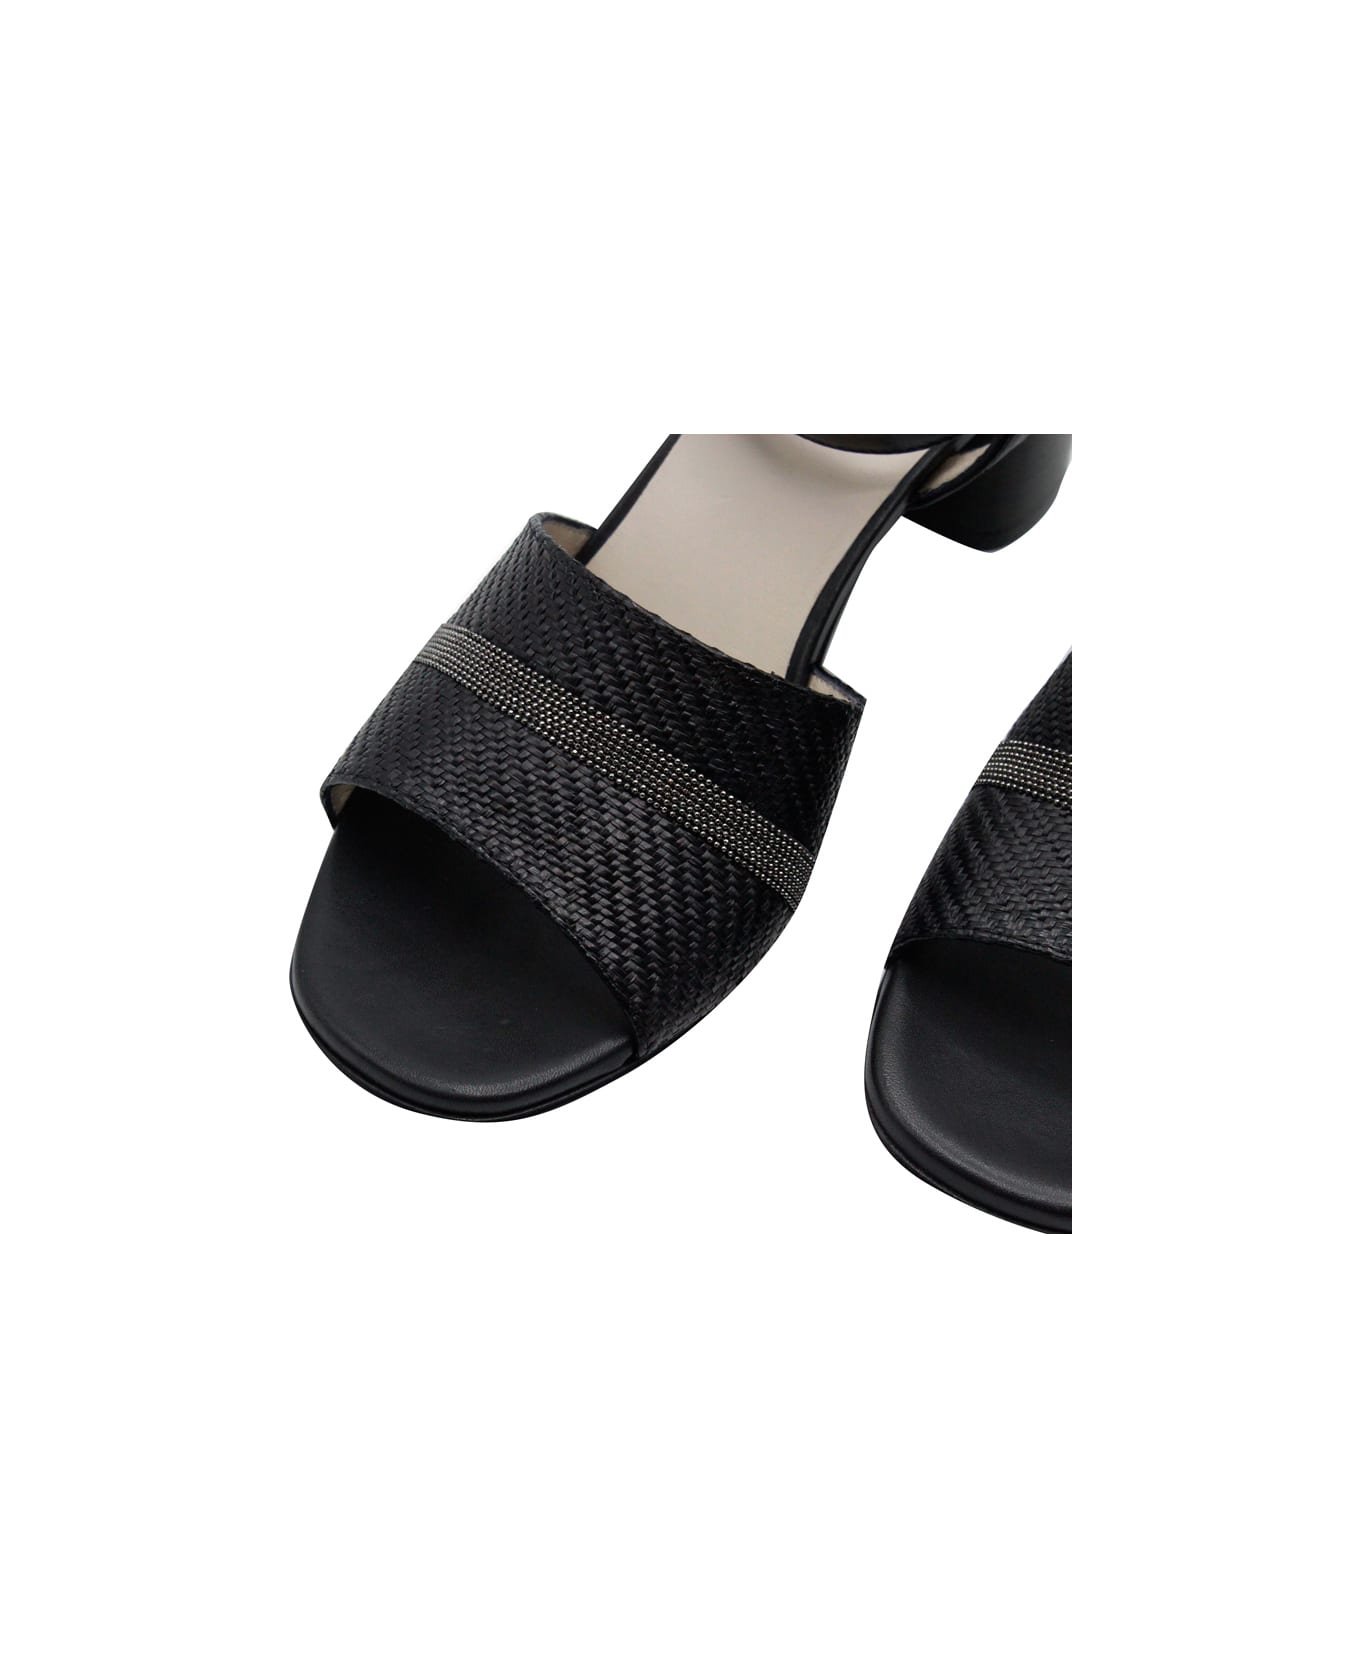 Fabiana Filippi Sandal Shoe Made Of Soft Leather With Adjustable Ankle Closure Embellished With Brilliant Jewels On The Front. Heel Height 6 - Black